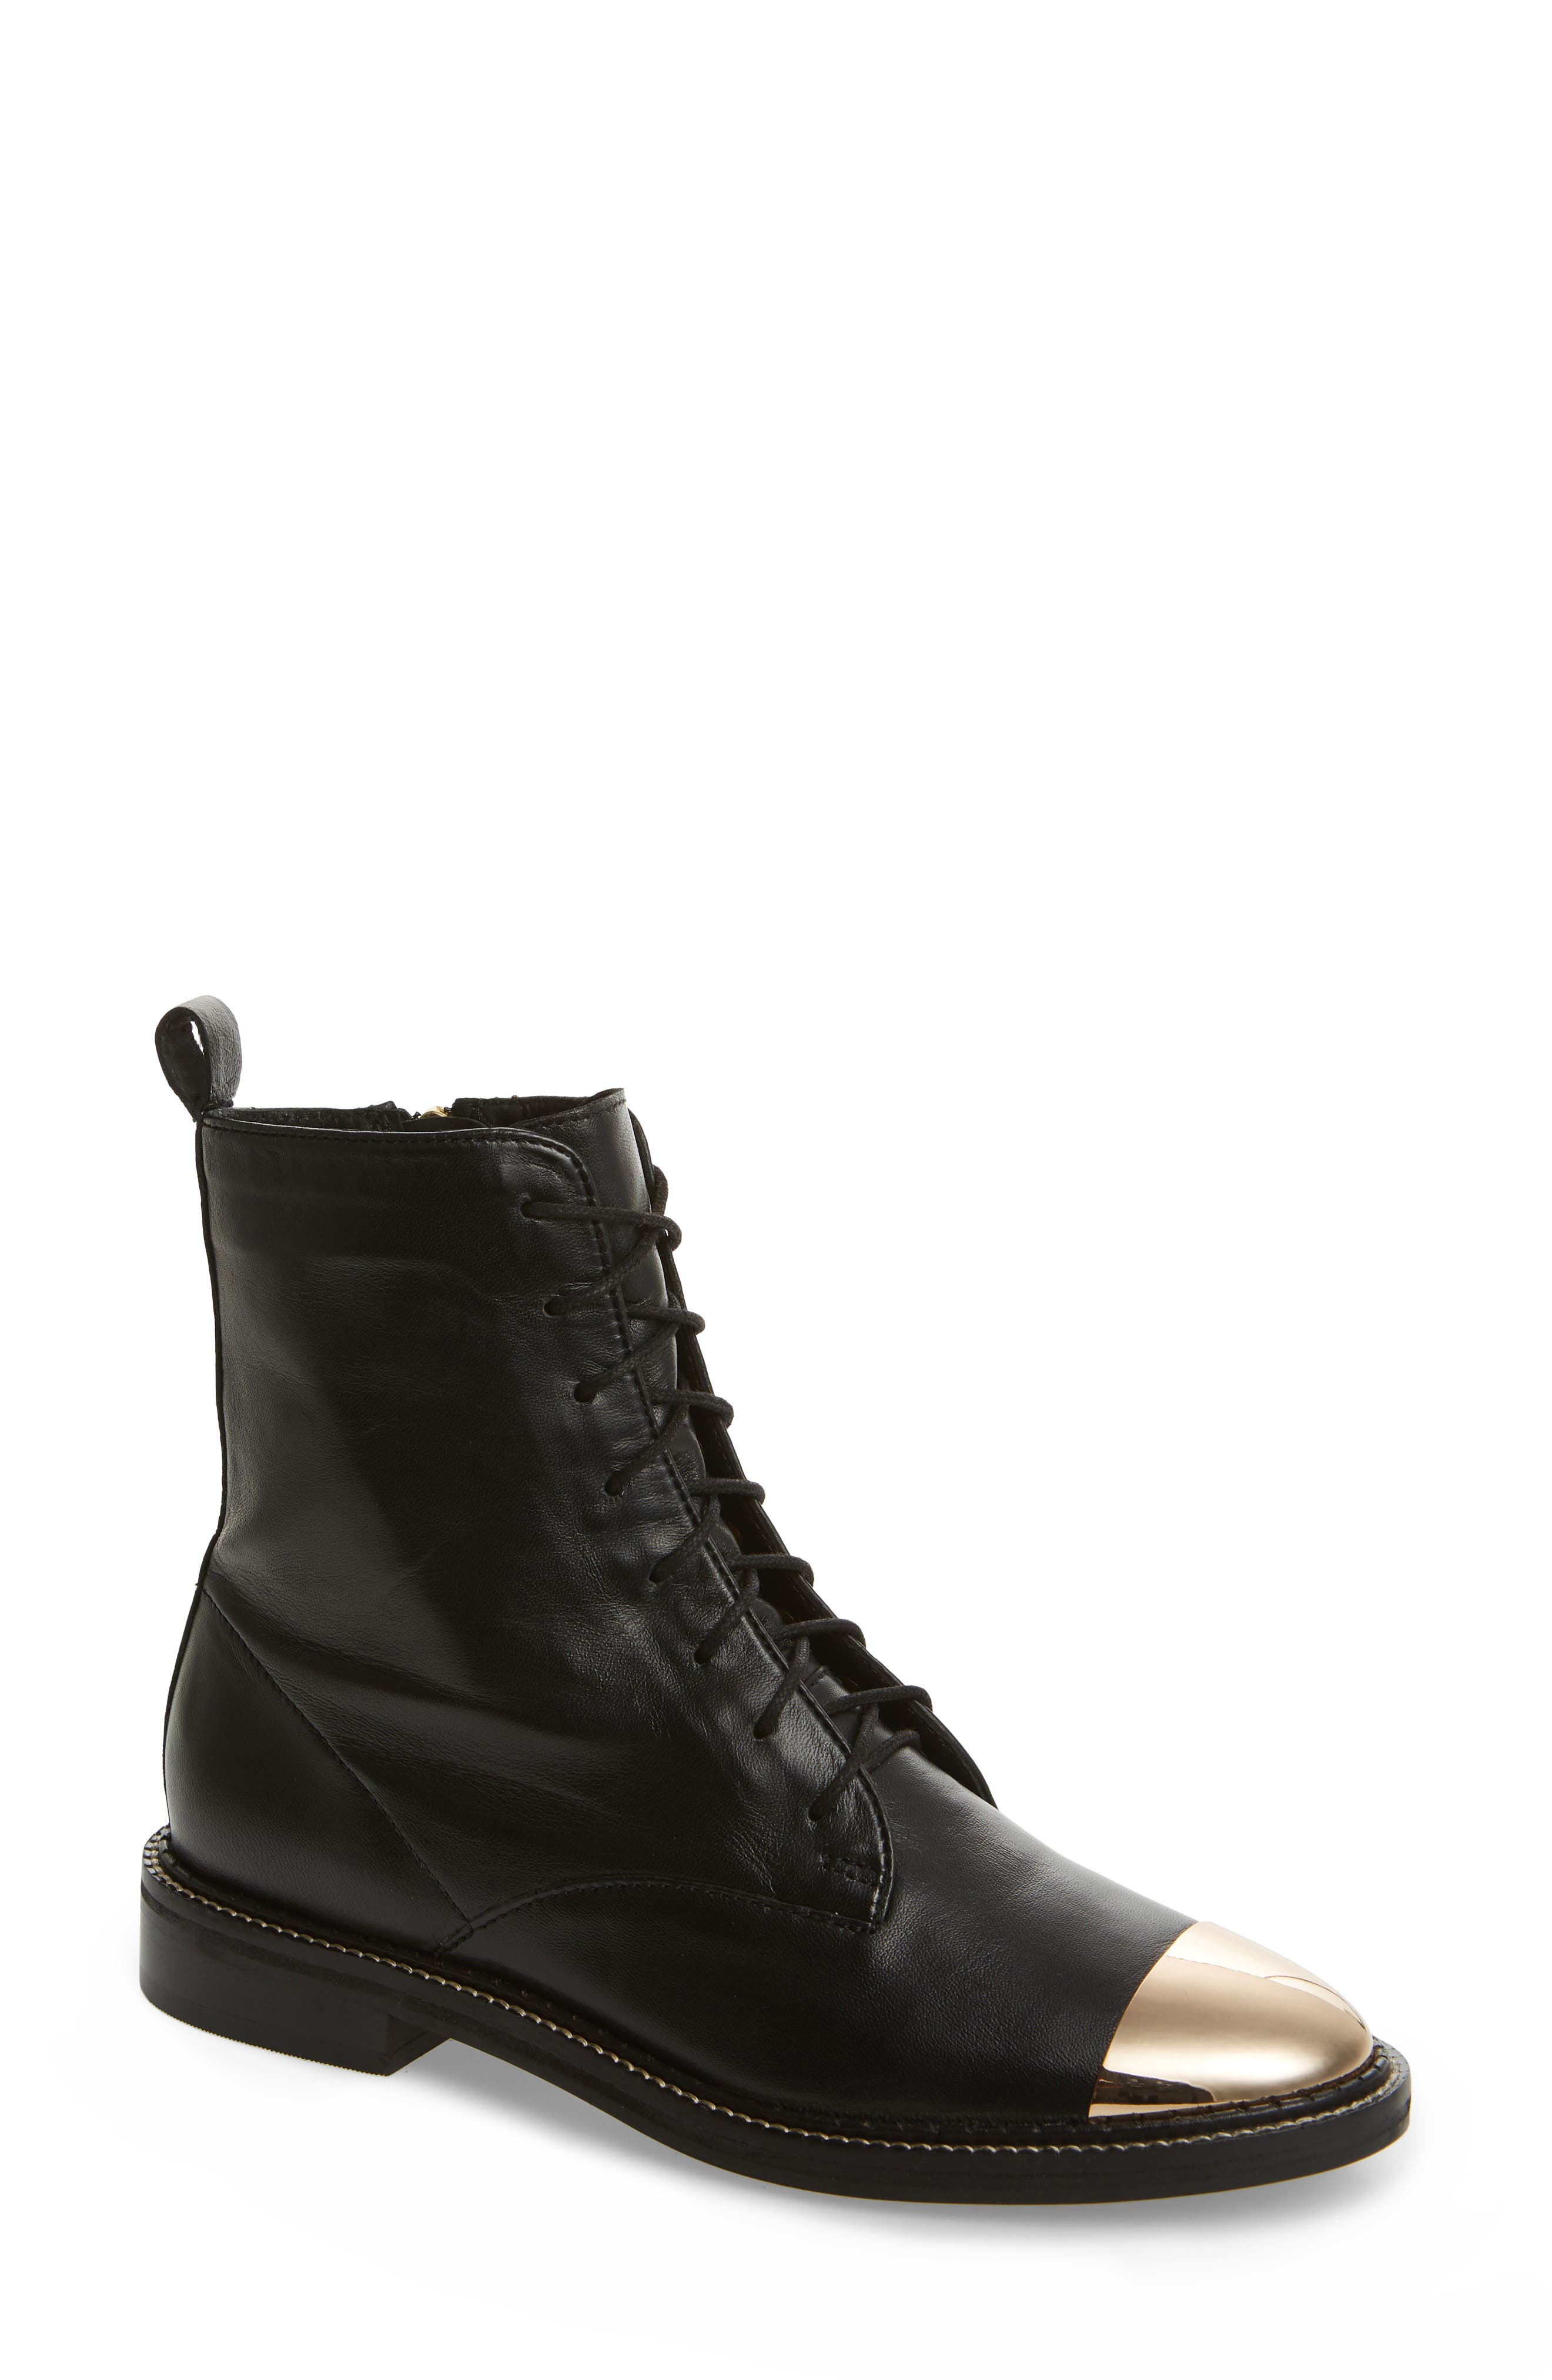 topshop axle boots